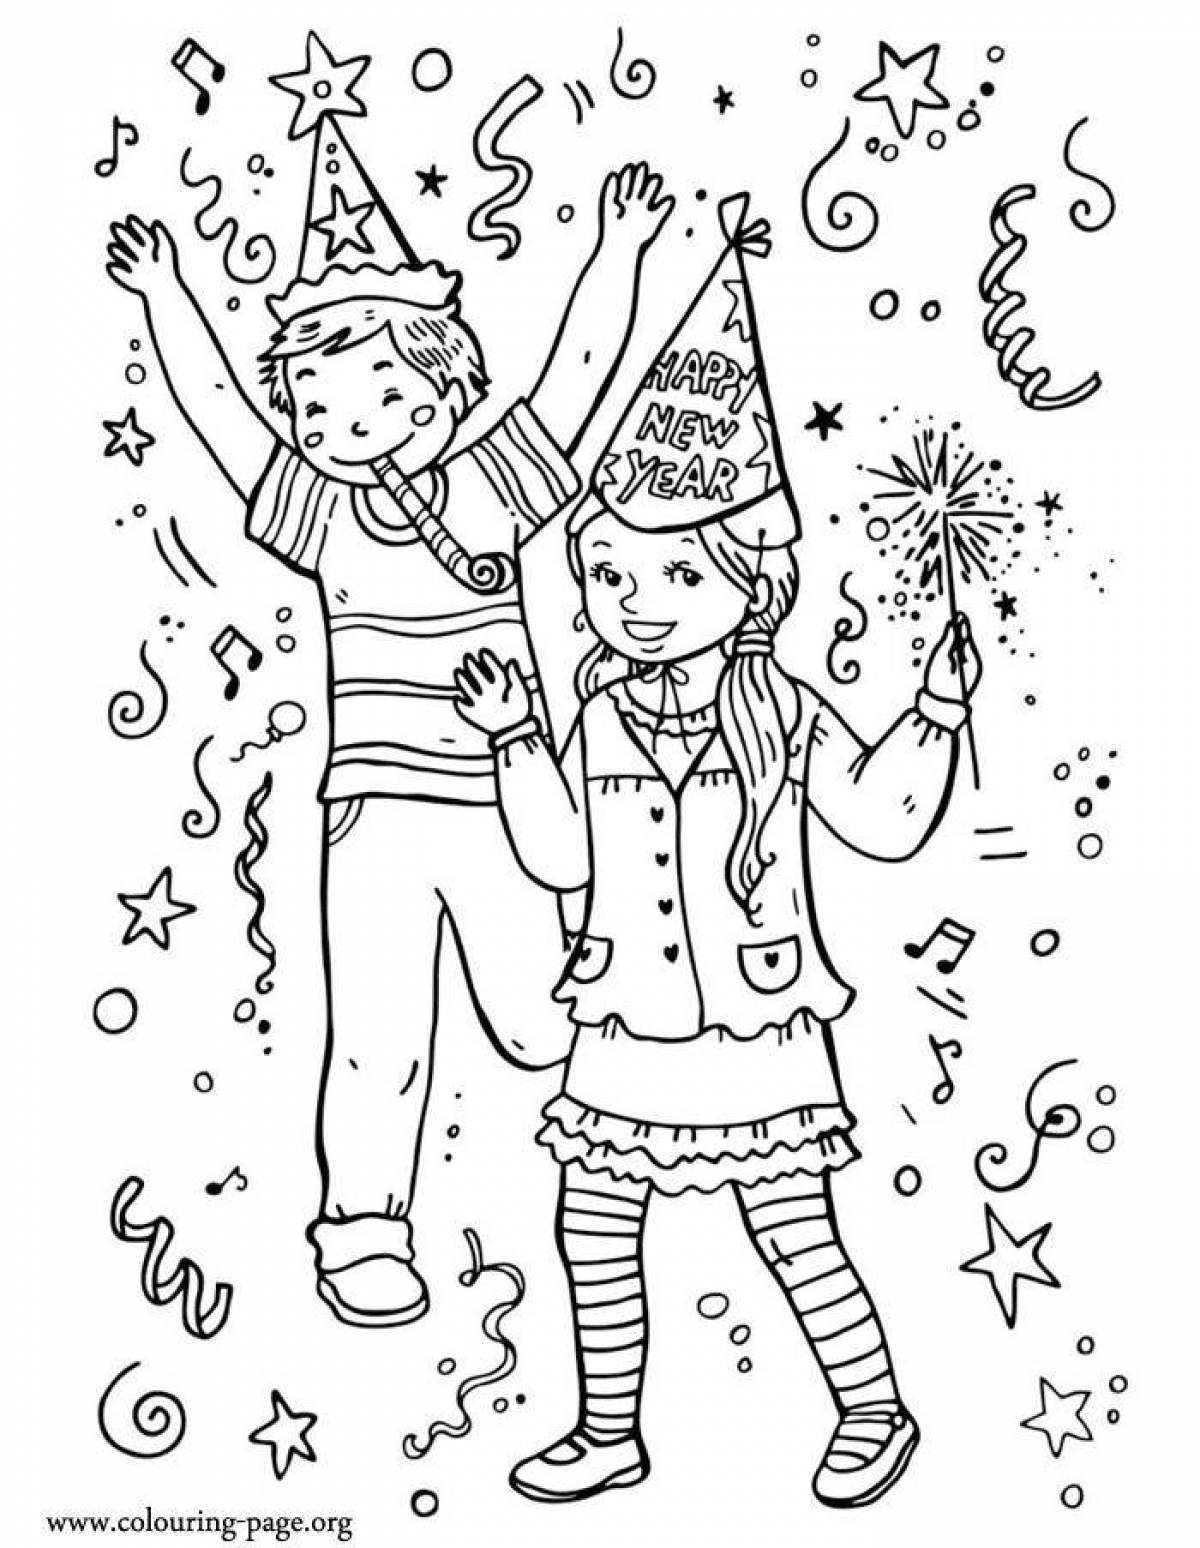 Happy new year live coloring